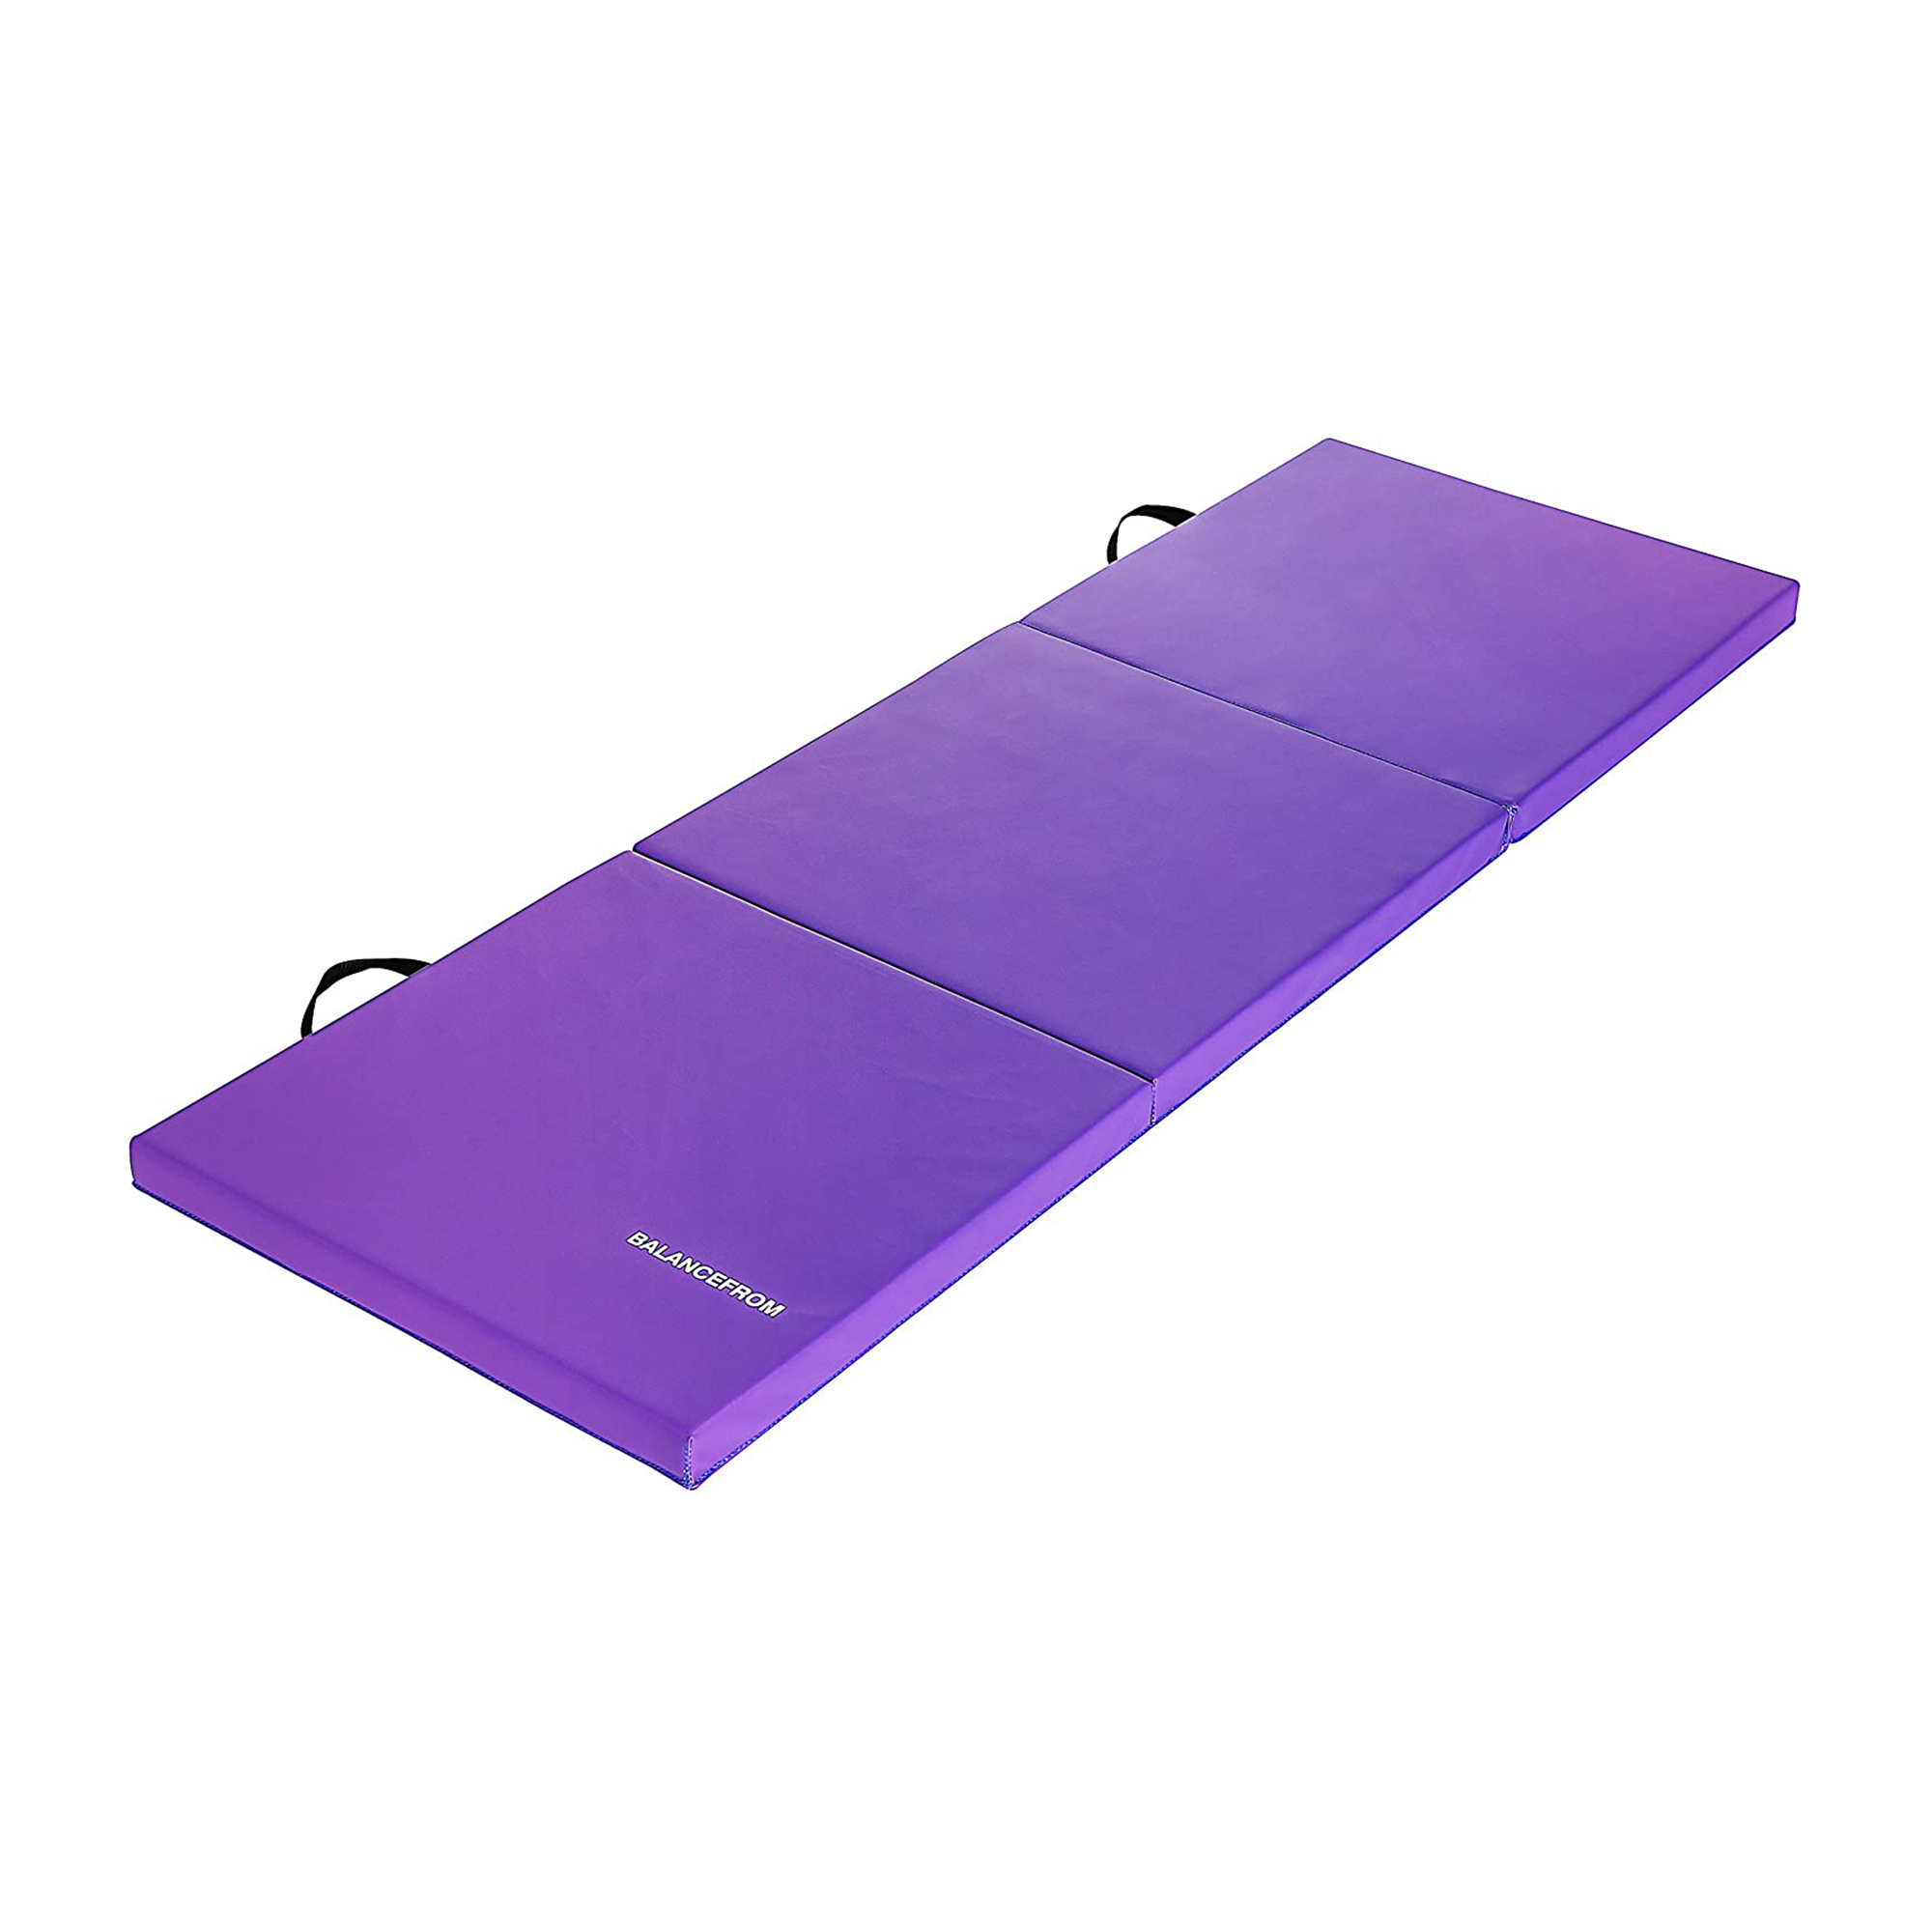 BalanceFrom 6 Ft. x 2 Ft. x 2 In. Three Fold Folding Exercise Mat with Carrying Handles for MMA, Gymnastics and Home Gym, Purple - image 2 of 6